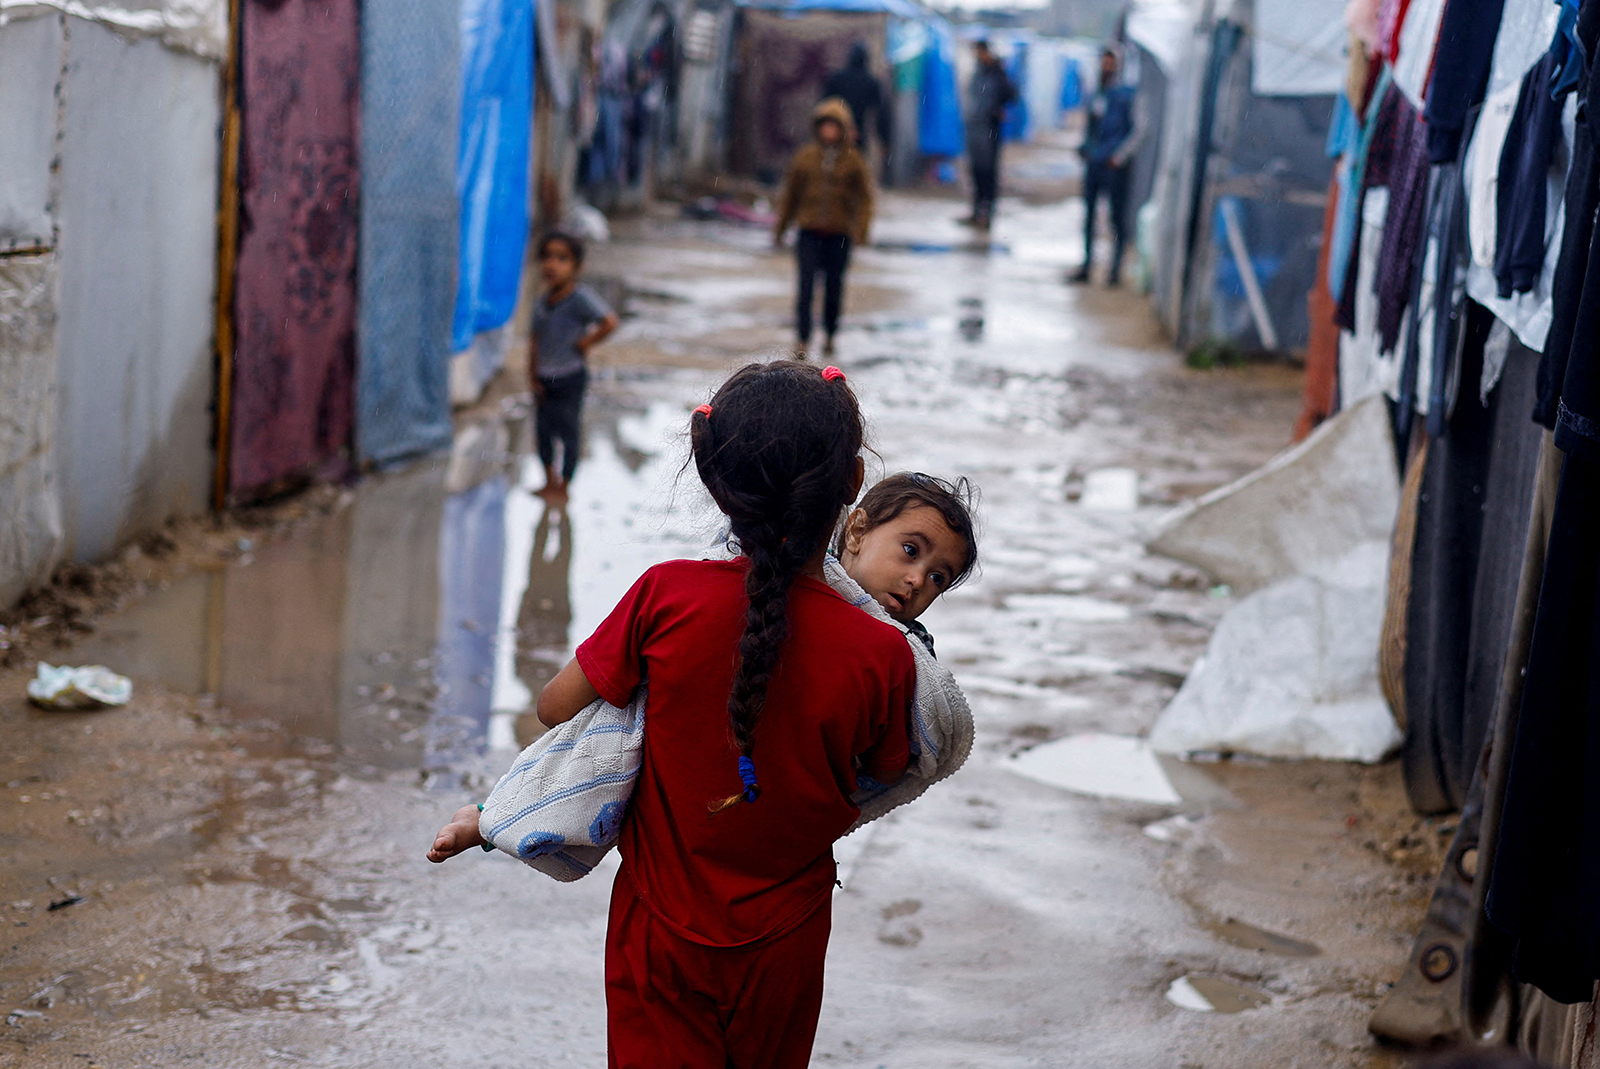 A displaced Palestinian girl holds a child as she walks at a tent camp on a rainy day in Rafah, Gaza on May 6.